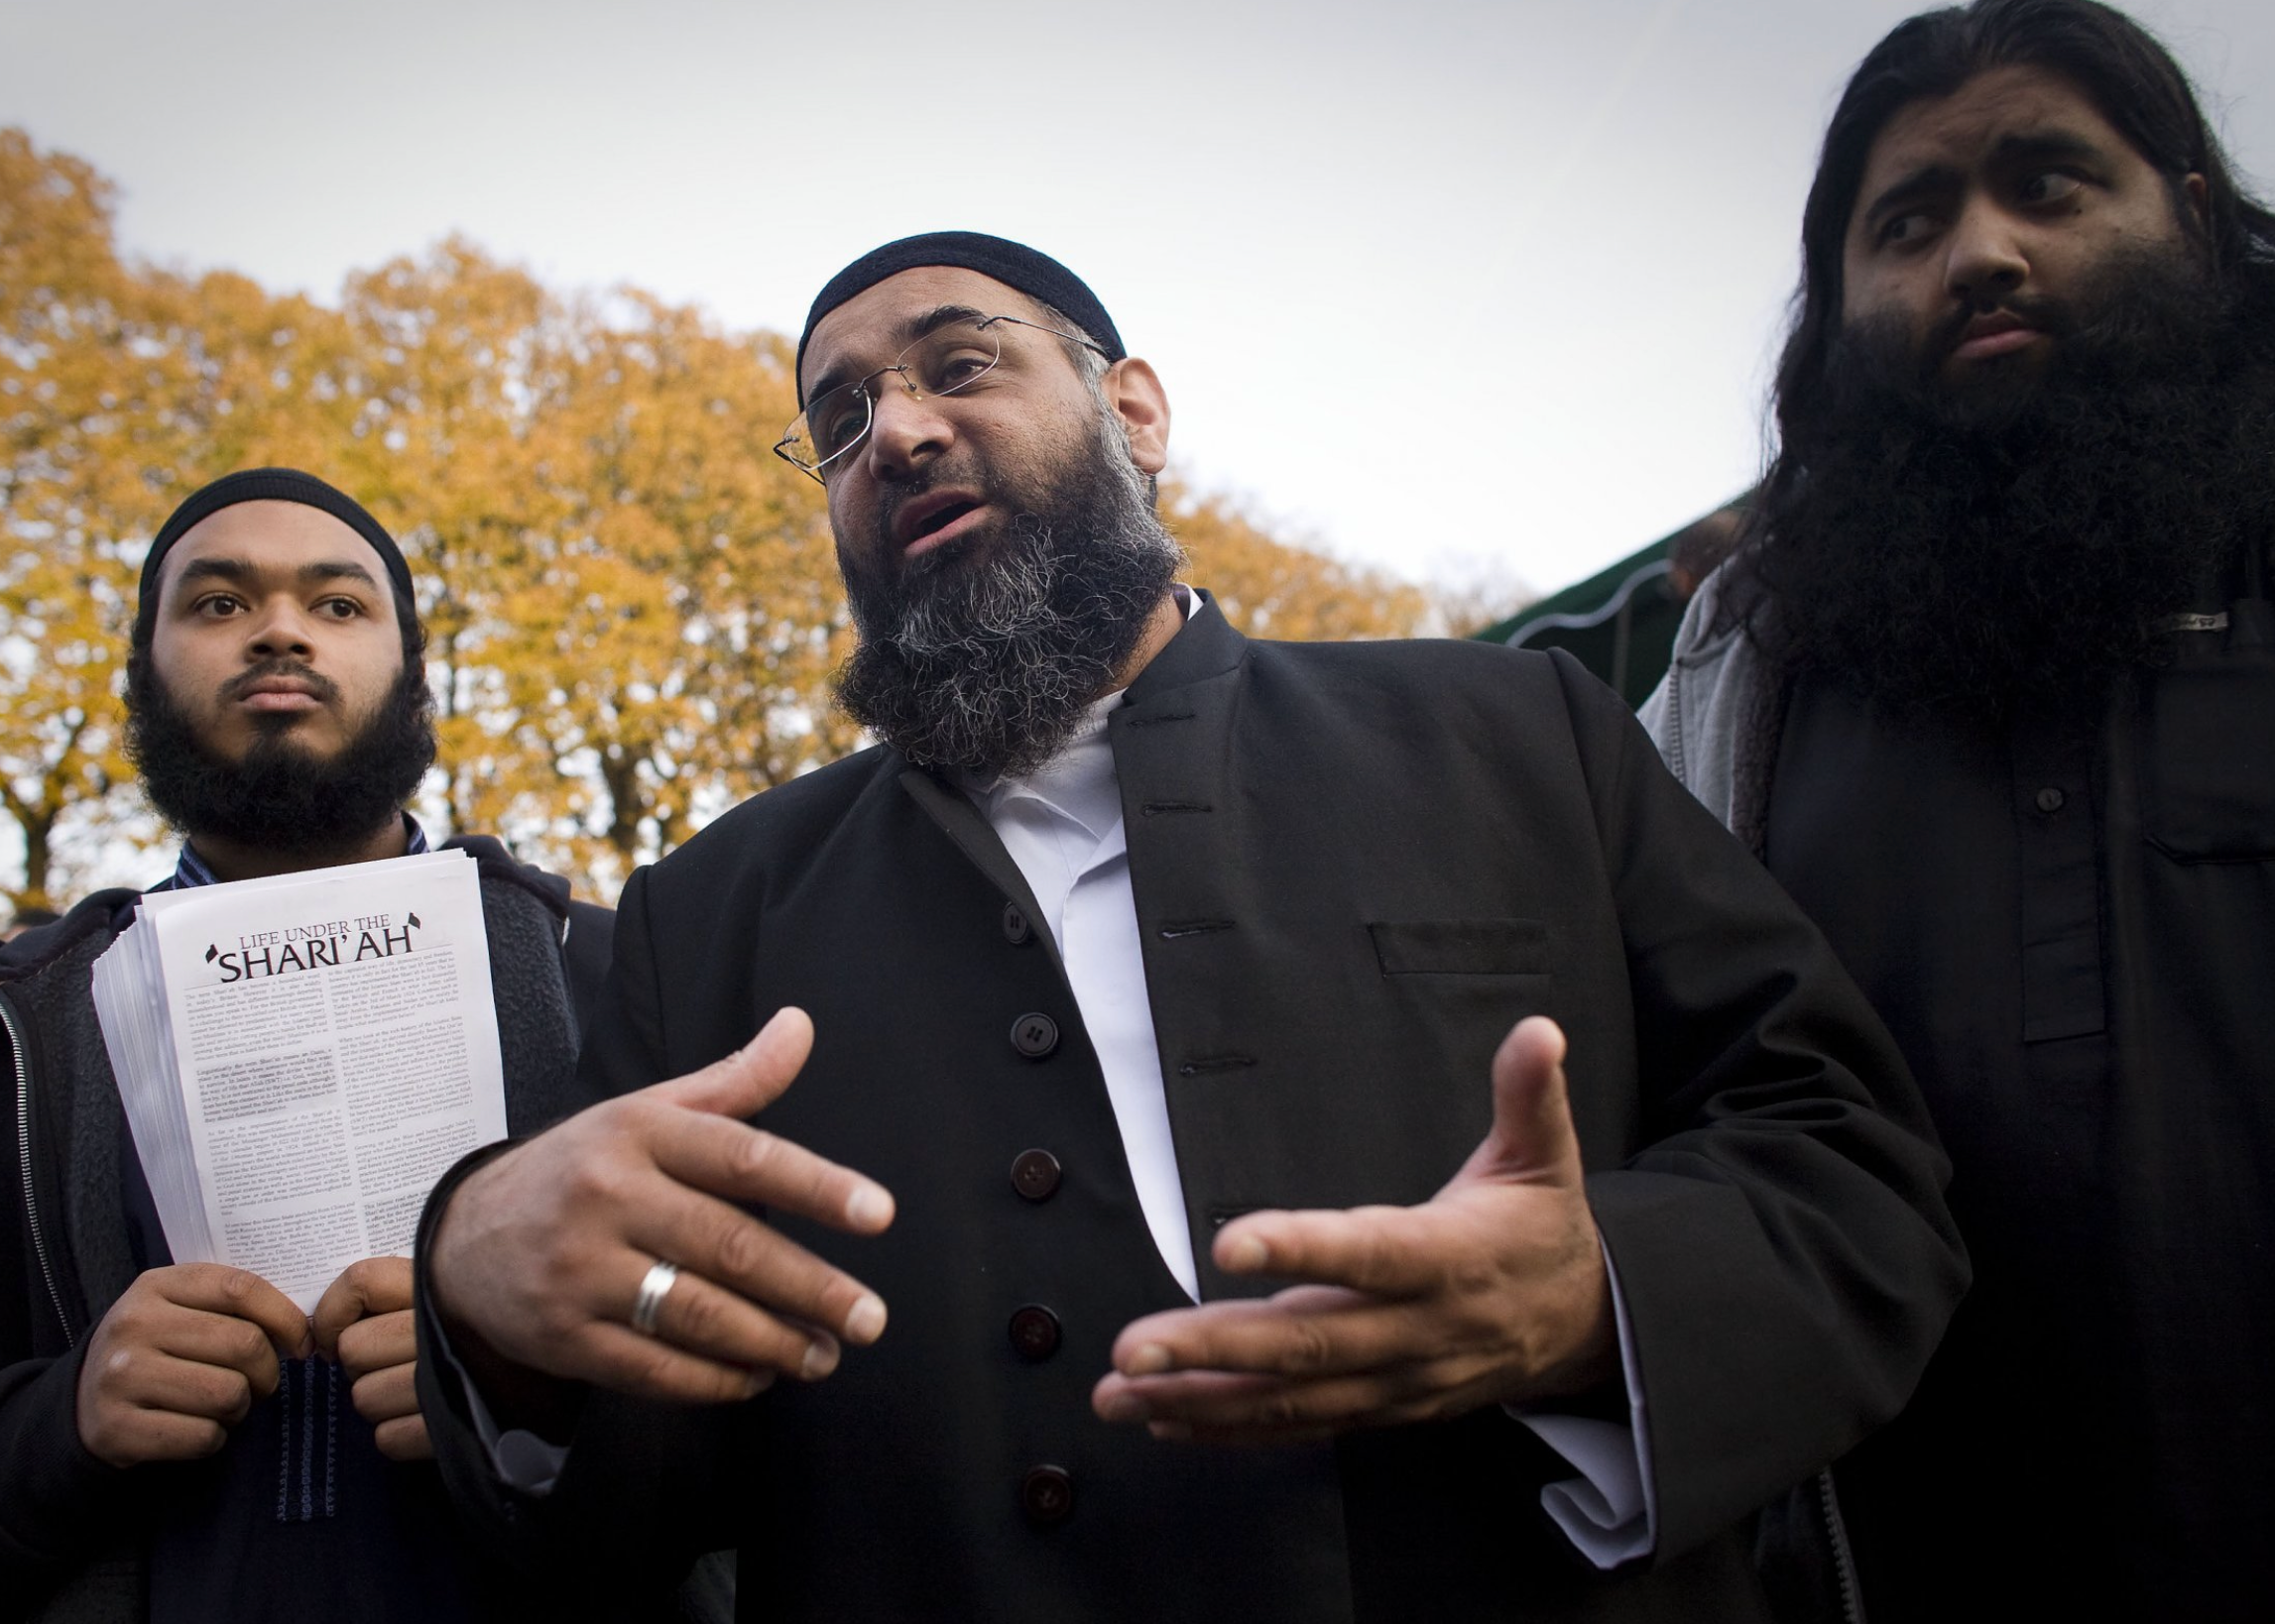 UK Islamist preacher Anjem Choudary charged with three terrorist offenses